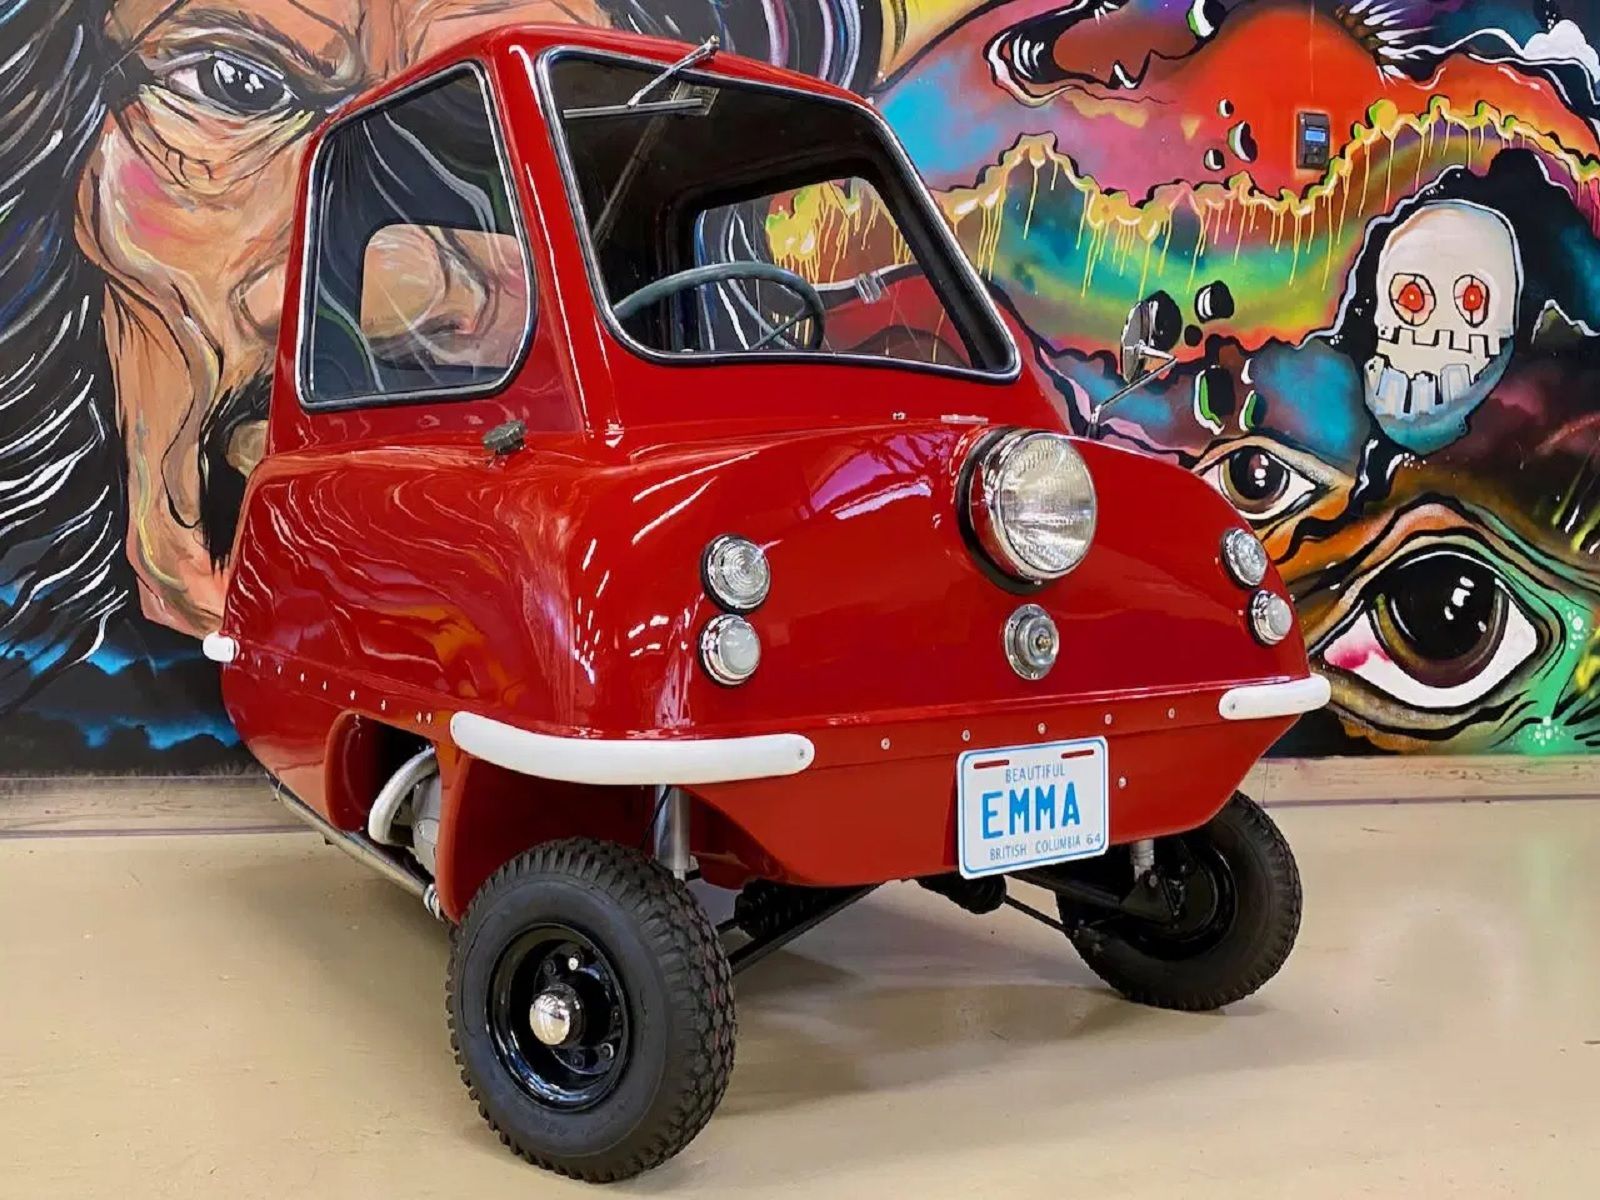 You Can Own the World's Smallest Car: A Peel P50